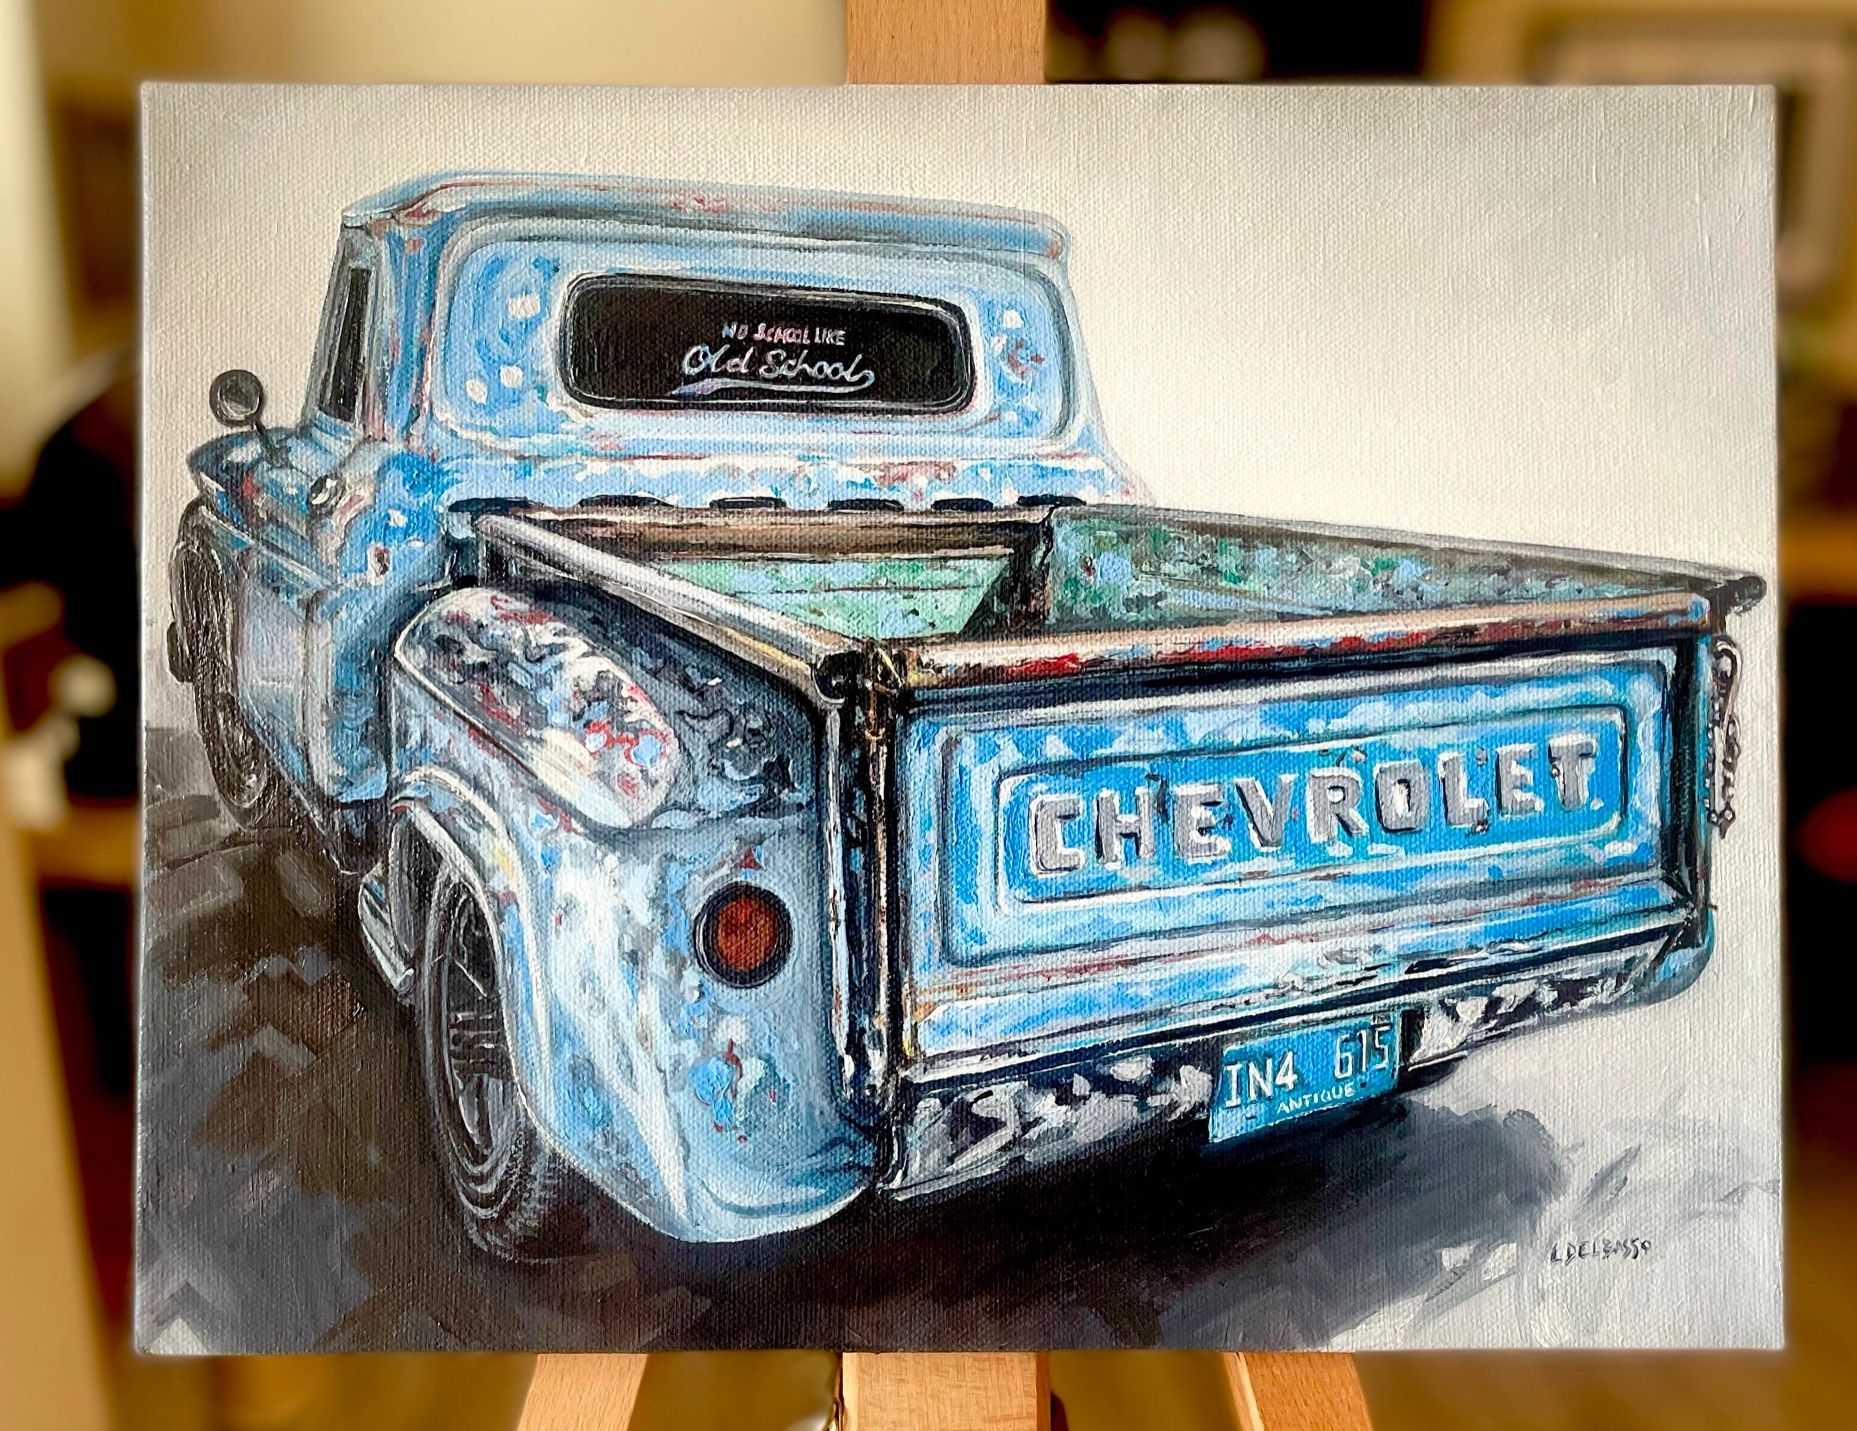 Chevy
Oil on Canvas
11" x 14"